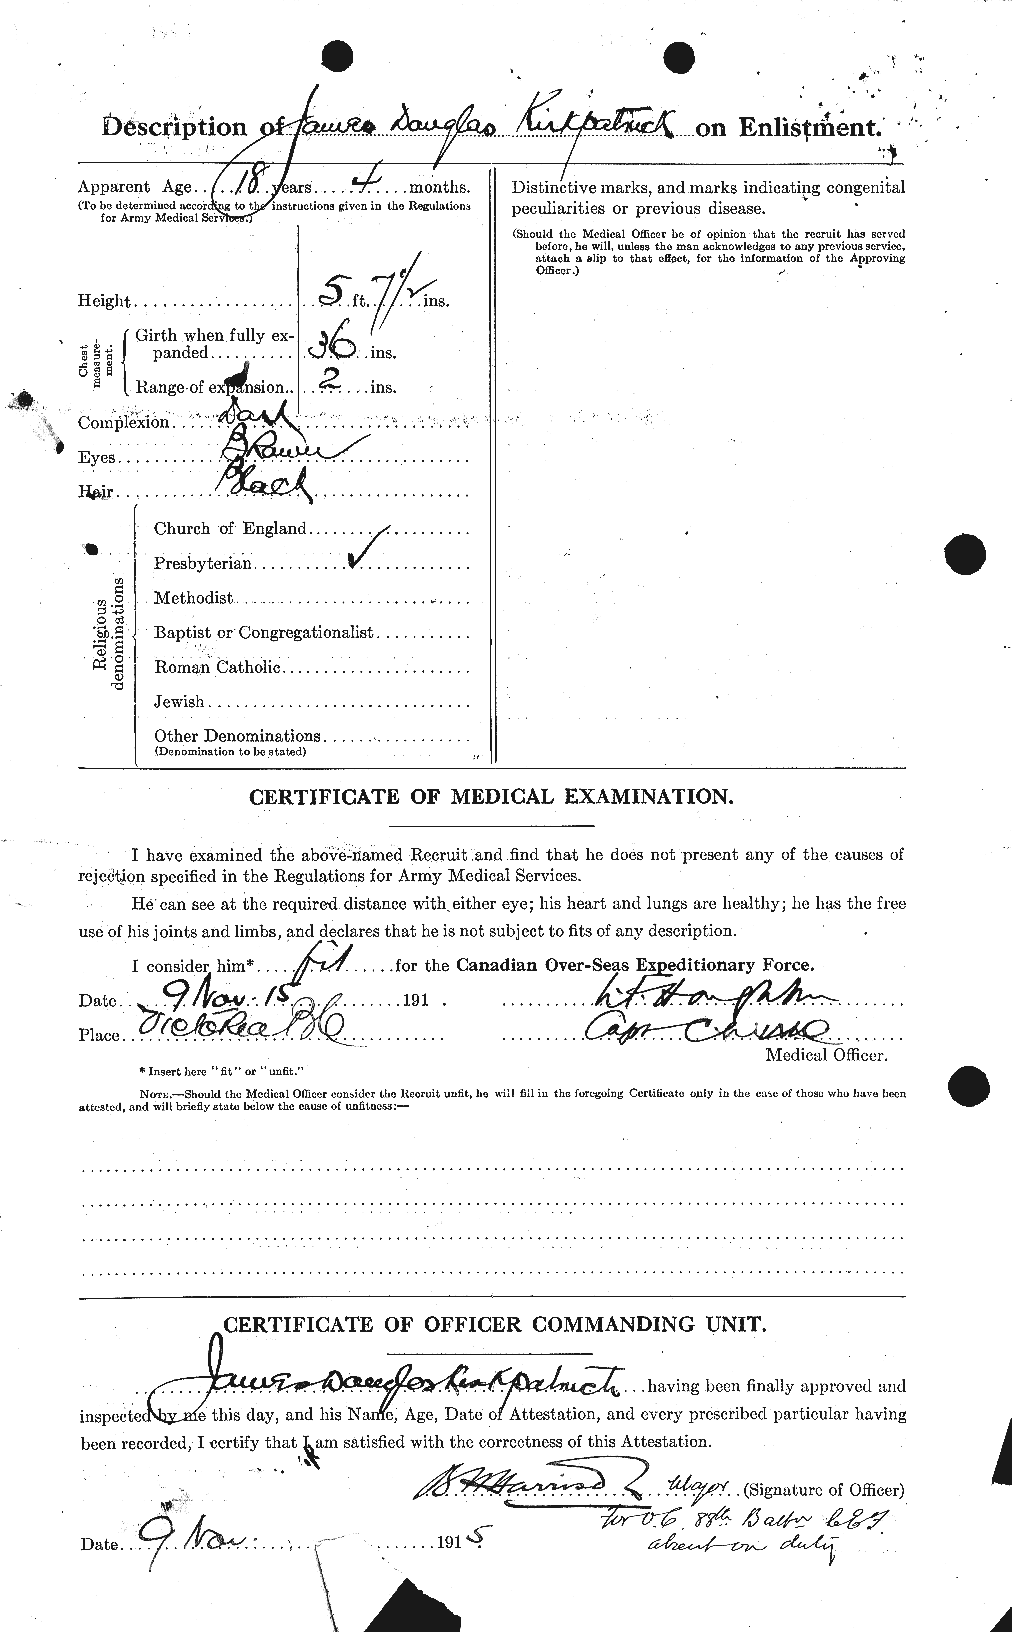 Personnel Records of the First World War - CEF 436075b